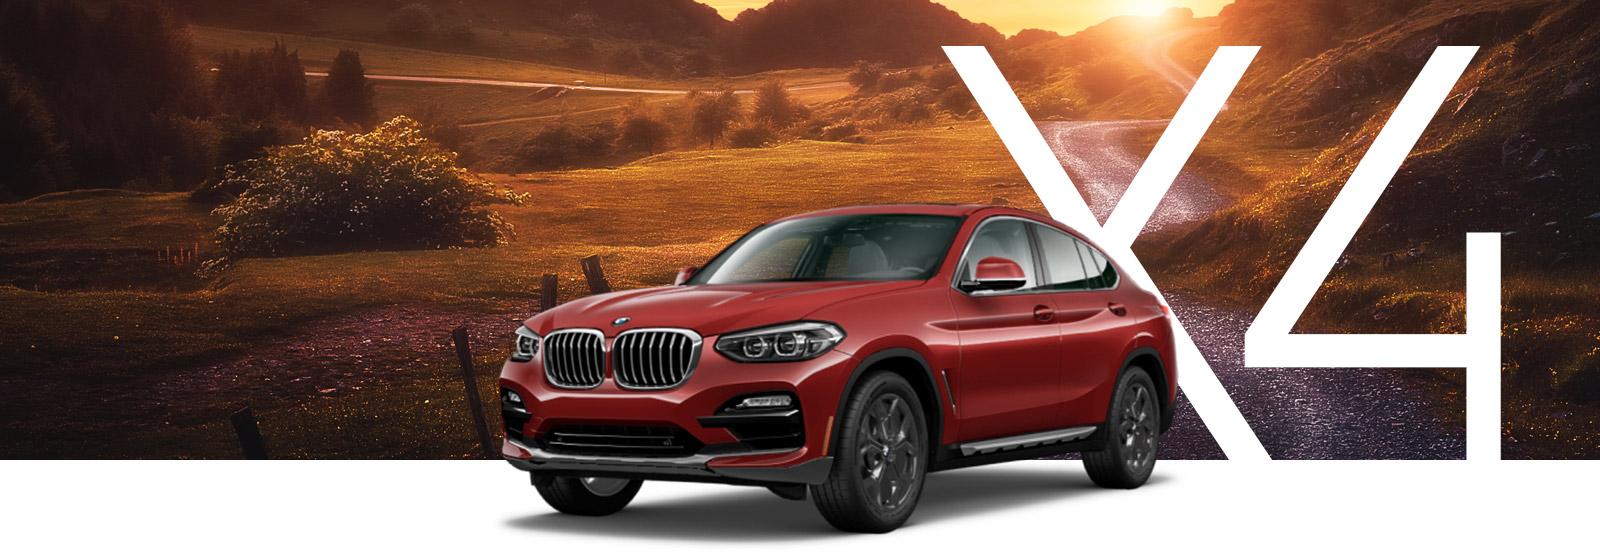 A red BMW X4 driving along a winding desert road at sunset.